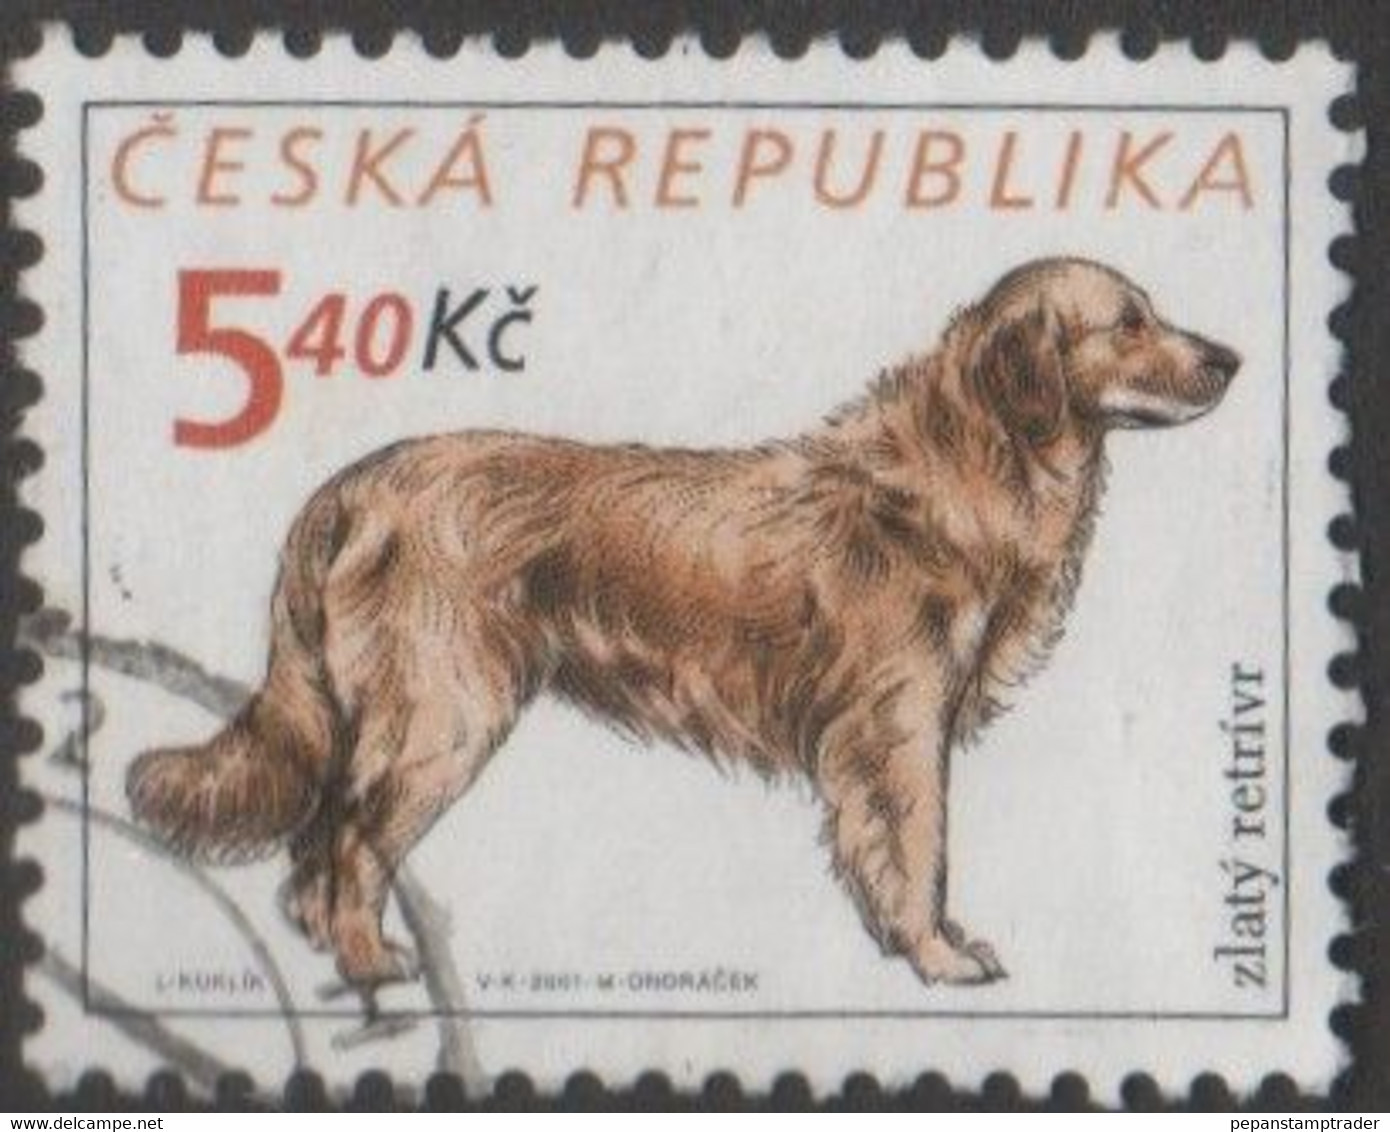 Czech Republic - #3151-b - Used - Used Stamps